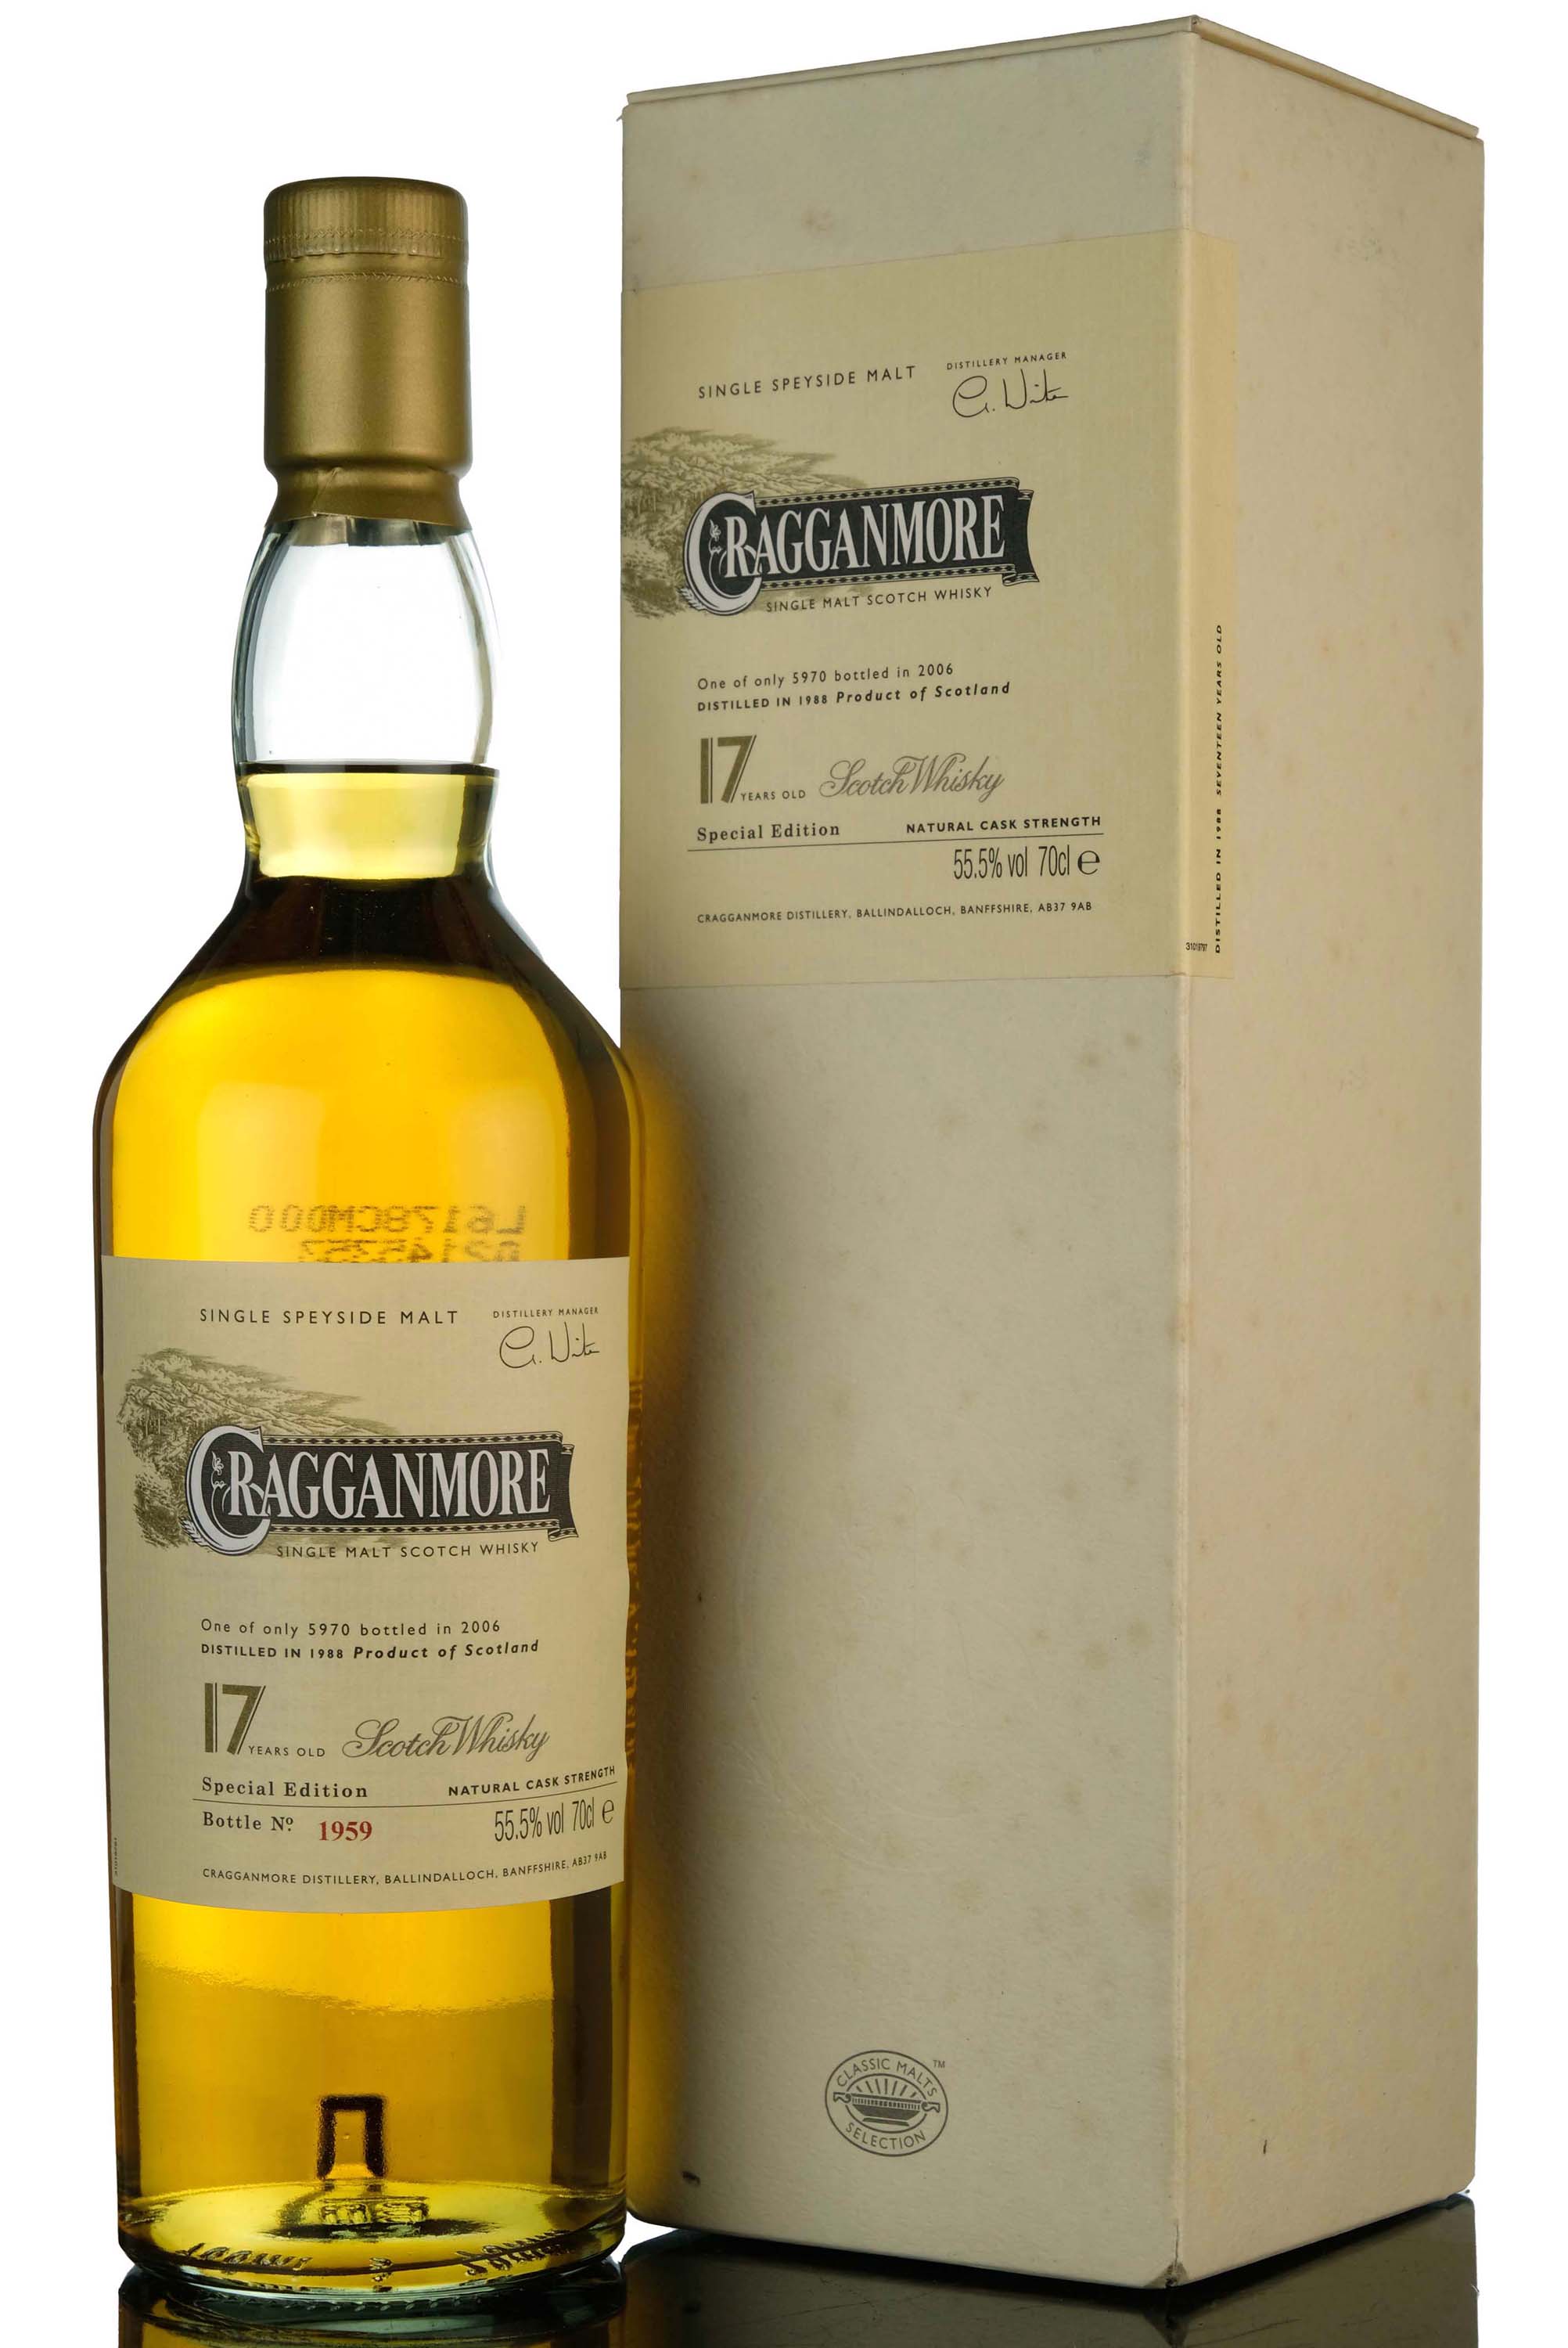 Cragganmore 1988 - 17 Year Old - Special Releases 2006